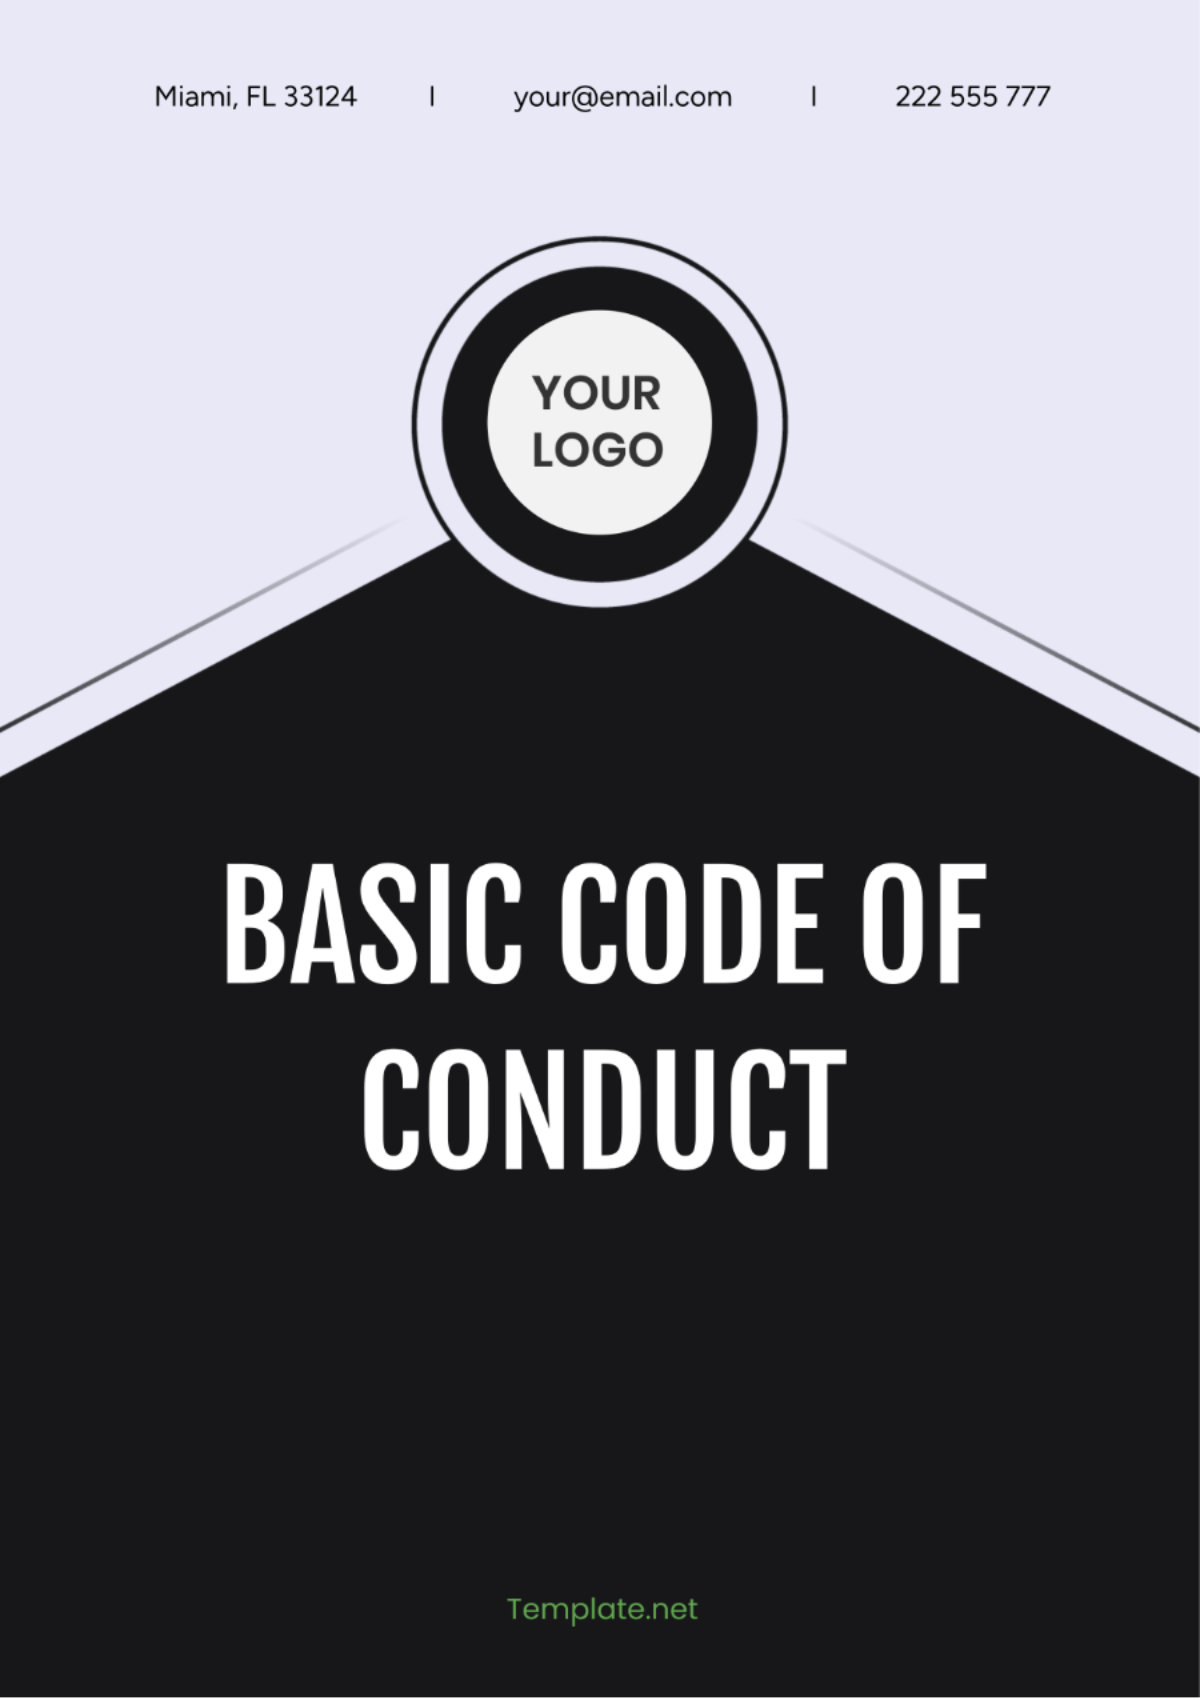 Basic Code of Conduct Template